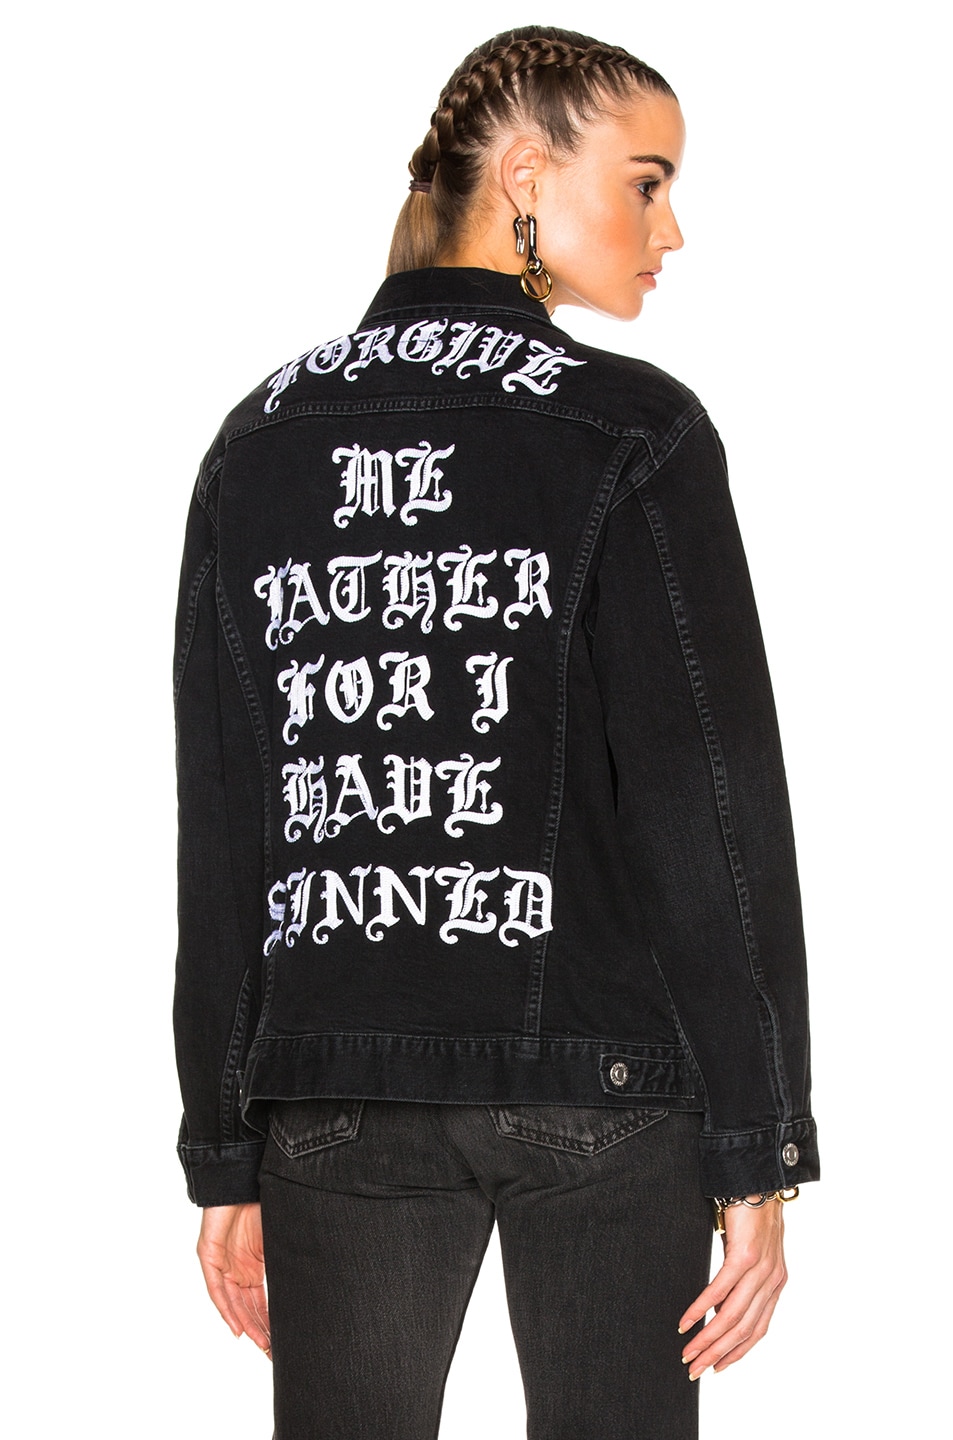 Image 1 of Adaptation x The Chain Gang Jean Jacket in Black & Chainstitch